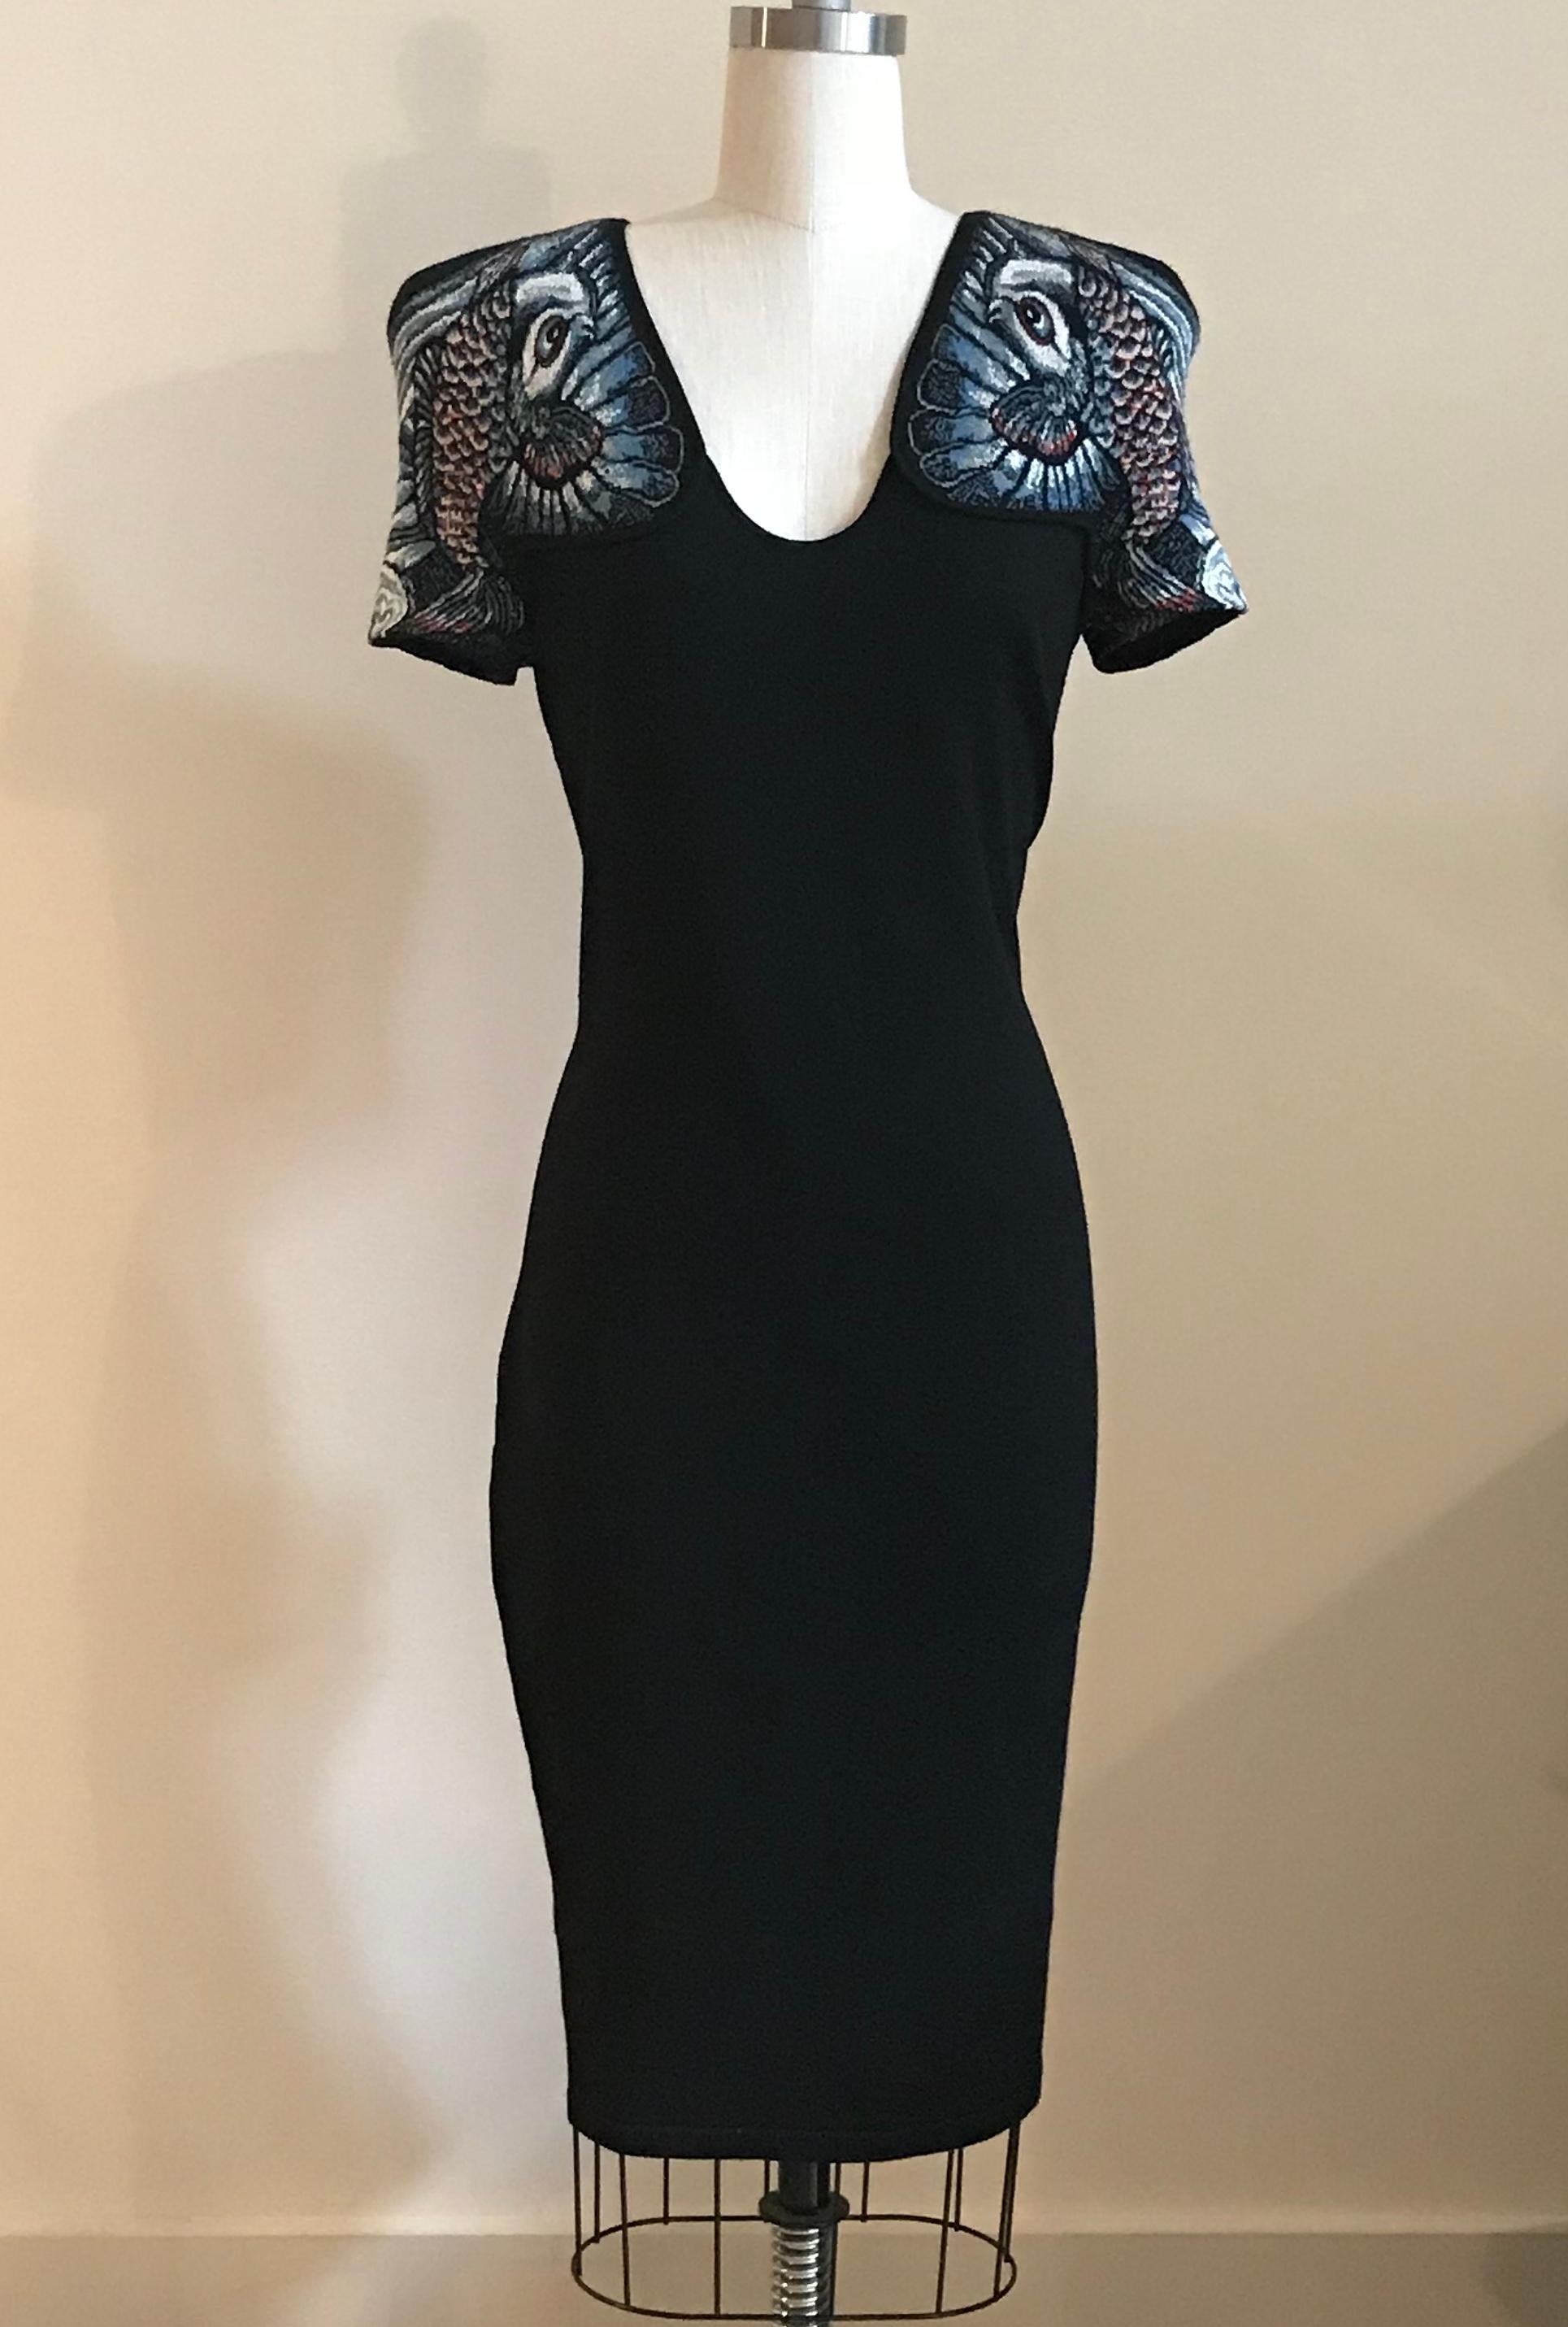 Alexander McQueen rare 2011 fine knit black dress featuring beautiful blue koi fish design at shoulders. Scoop neck, light shoulder padding. Pull-on, no closure. 

Main fabric: 89% wool, 11% nylon. 
Jacquard insets: 71% cotton, 29% silk.

Made in